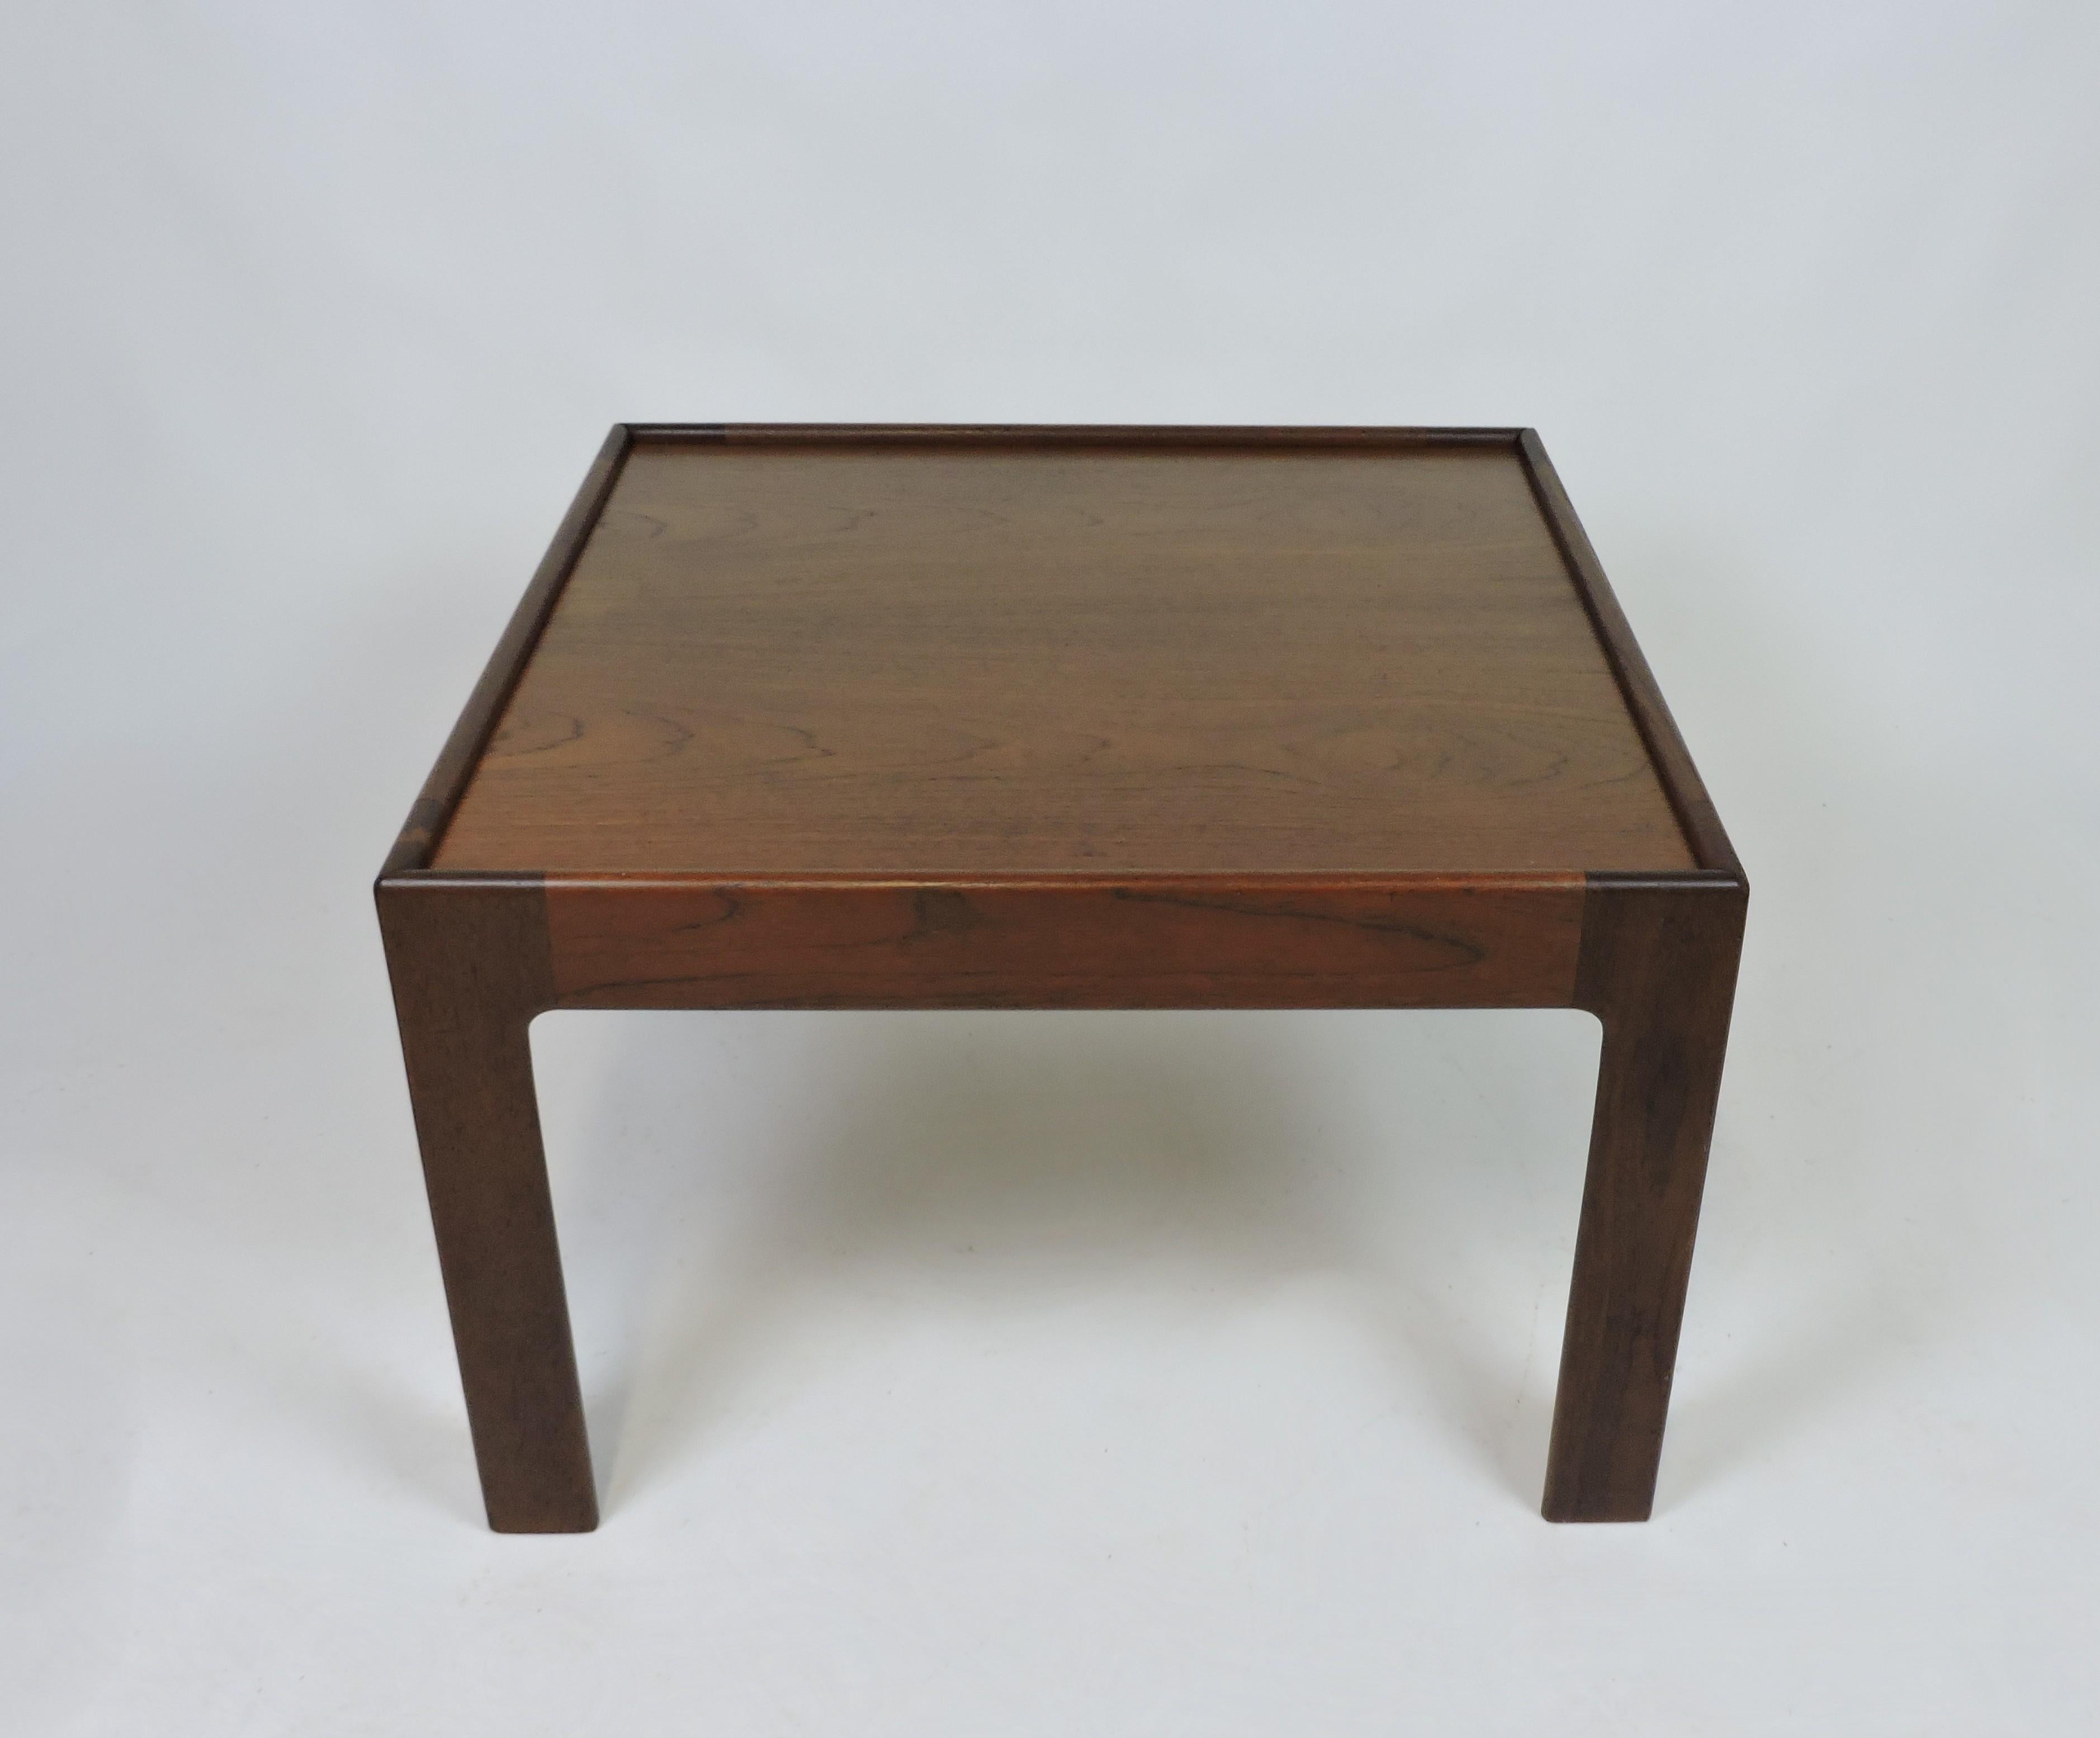 Handsome and substantial large end table designed by Illum Wikkelso and manufactured in Denmark by Neils Eilersen. This very well made table has solid teak legs and a top with beautiful wood grain. Labeled underneath.
It could also be used as a